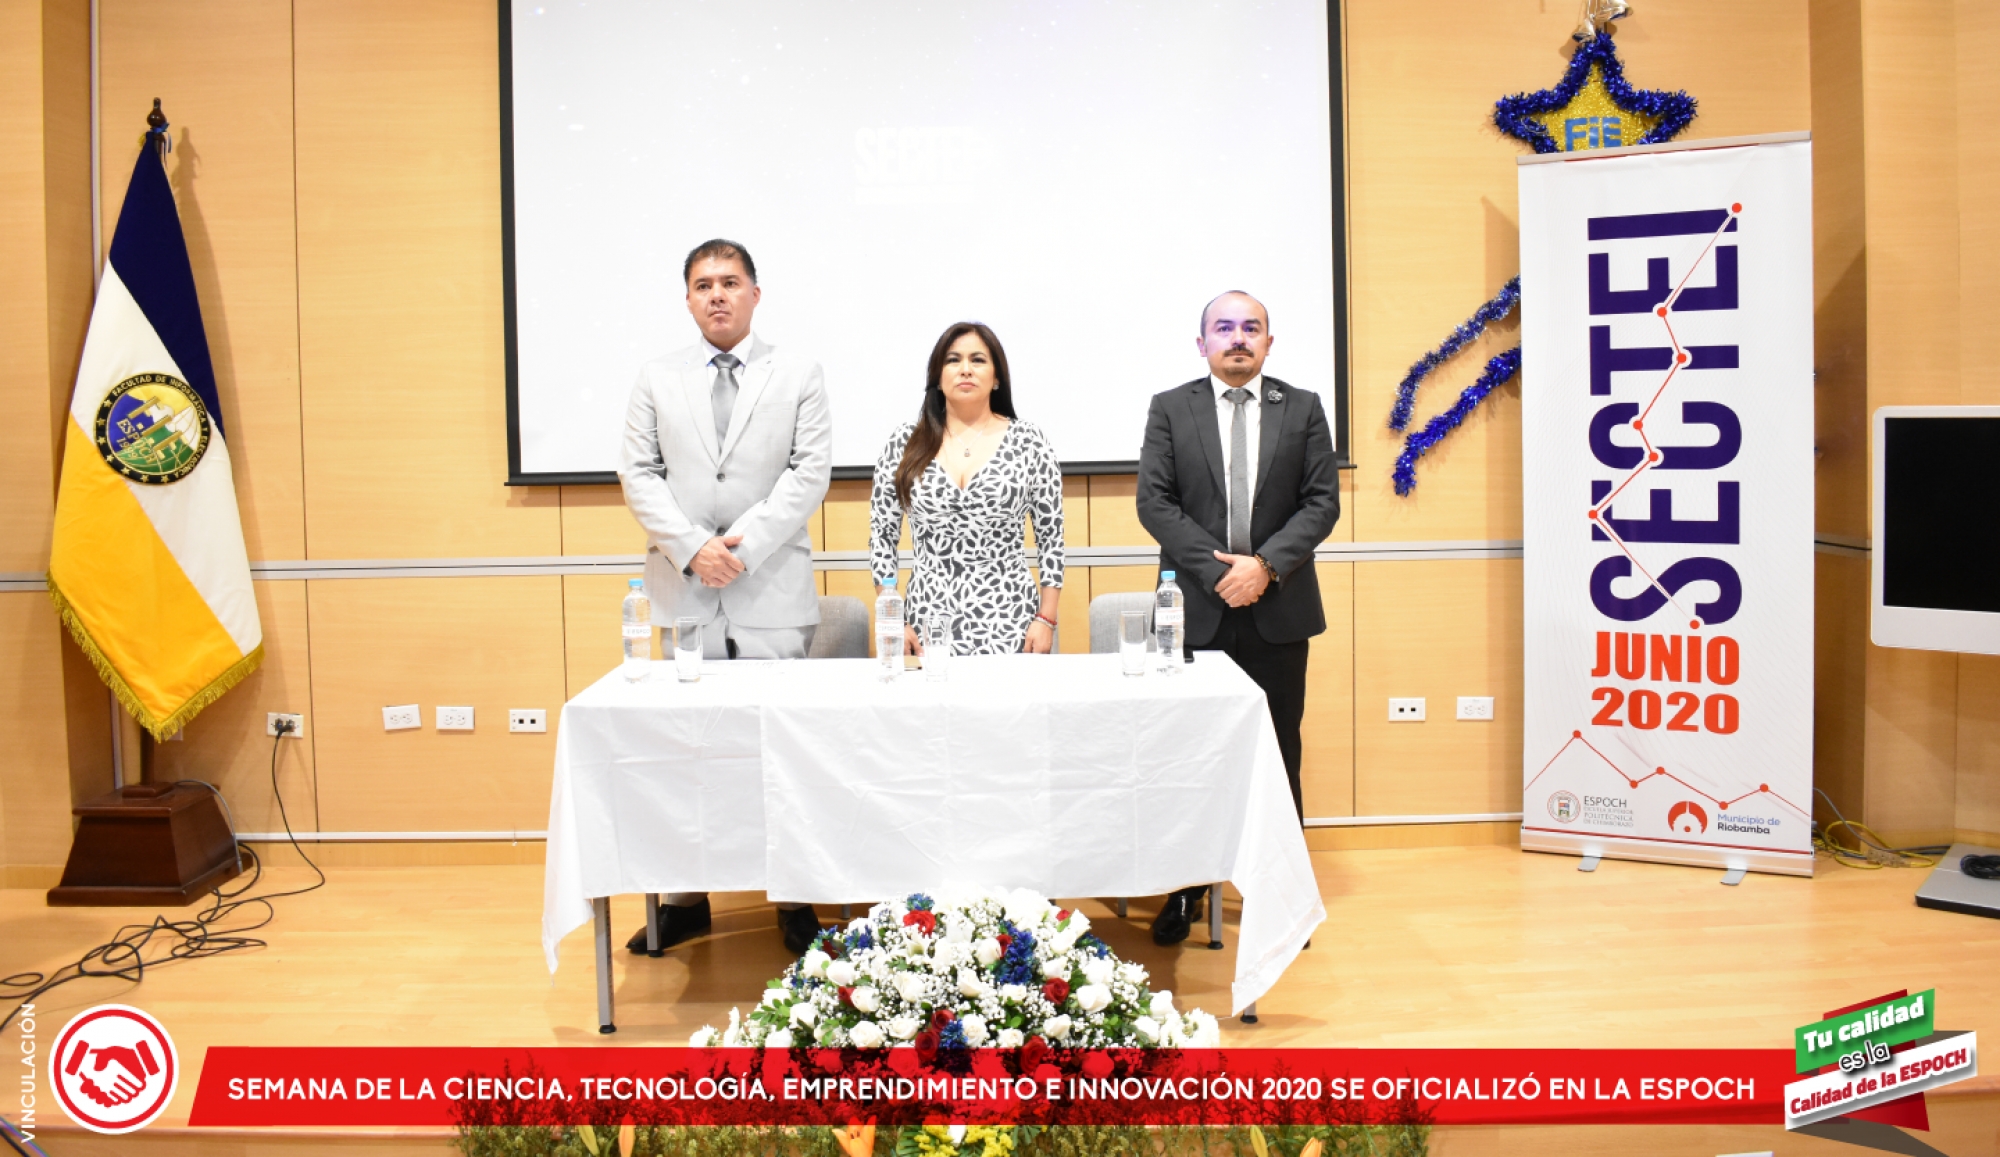 SCIENCE WEEK, TECHNOLOGY, BUSINESS AND INNOVATION 2020 WAS OFFICIALIZED IN THE ESPOCH